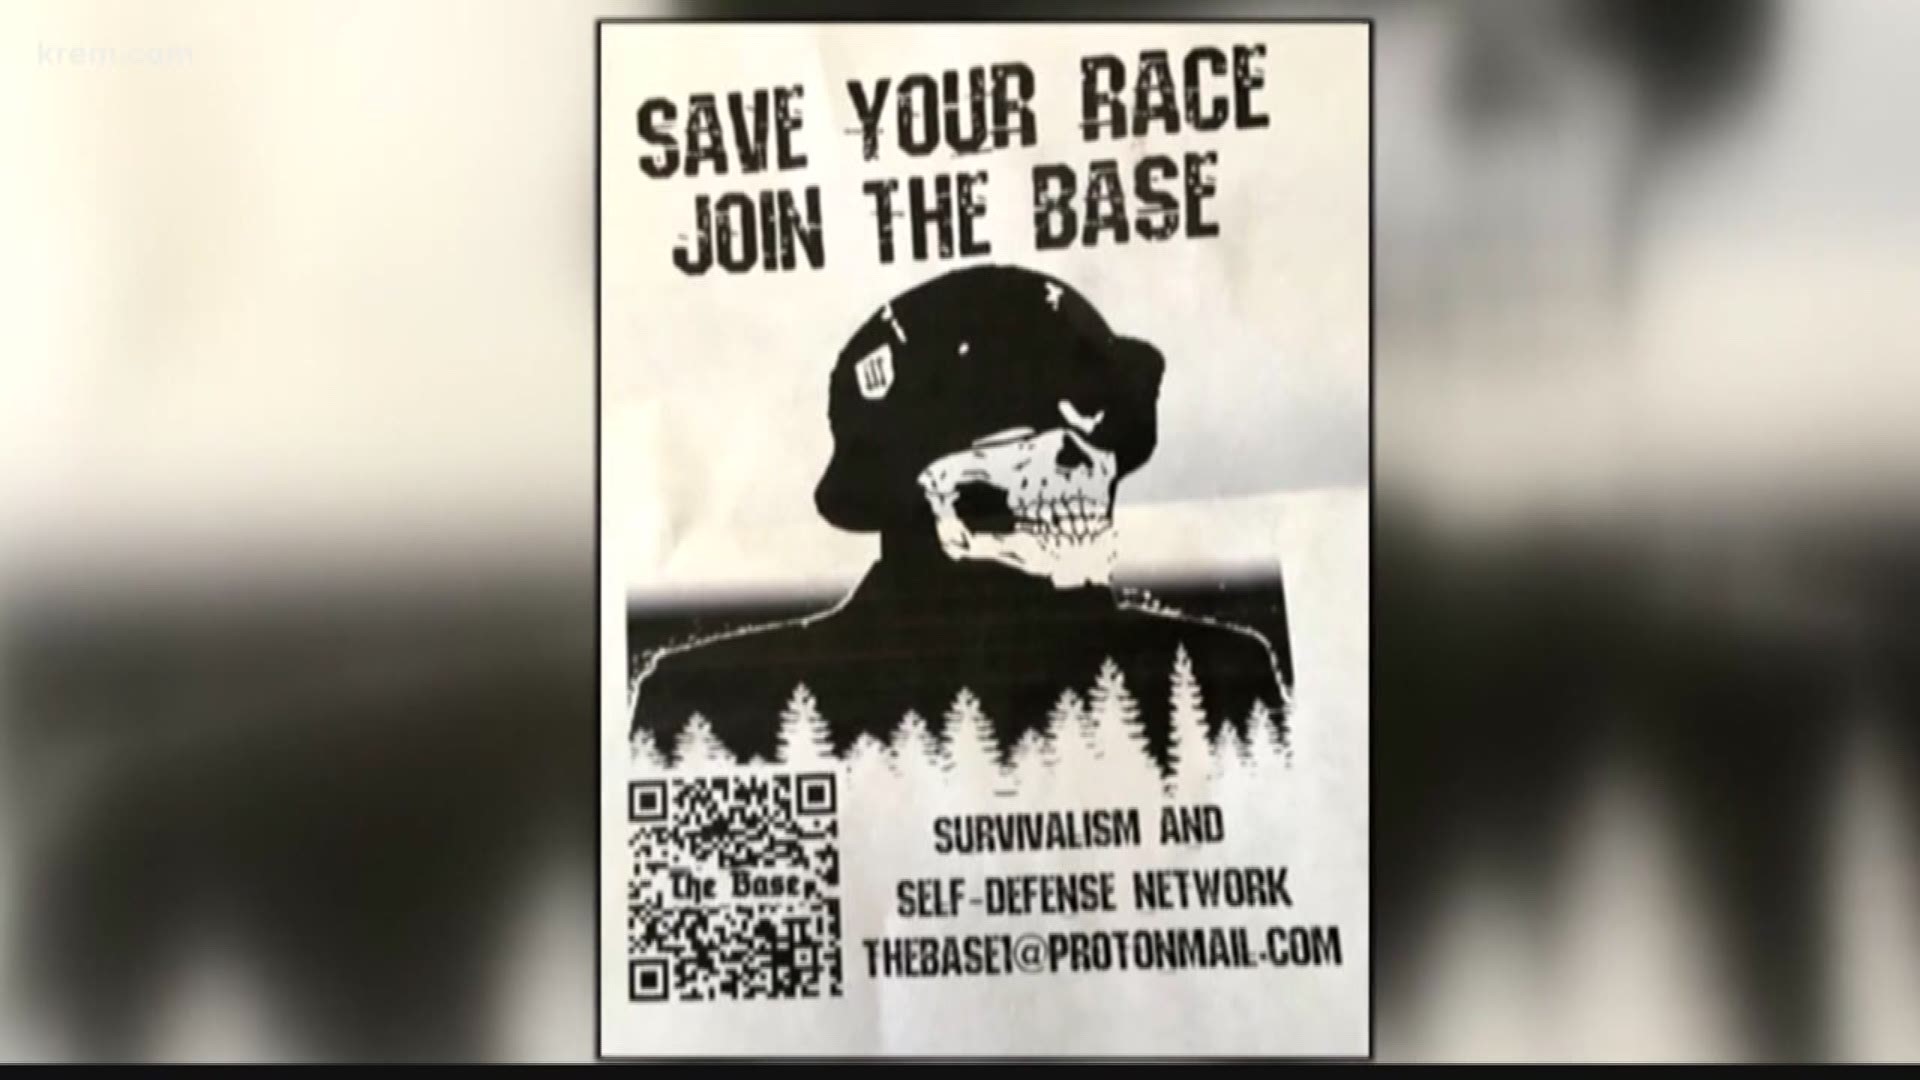 According to an investigation published by The Guardian, the neo-Nazi terrorist group's leader purchased thirty acres of land in Ferry County in 2018.